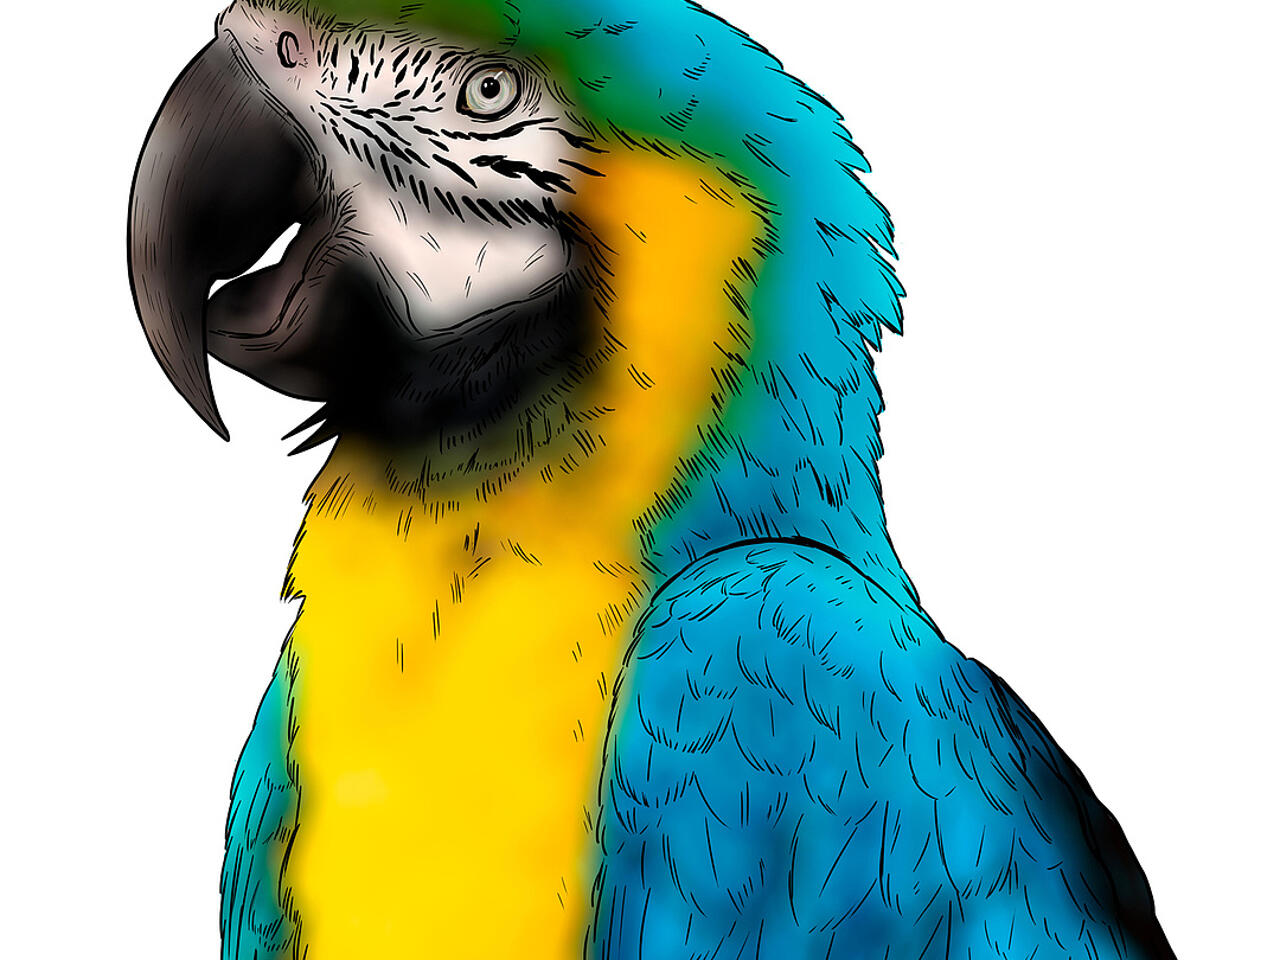 How To Draw an Adorable Parrot with Vibrant Colors